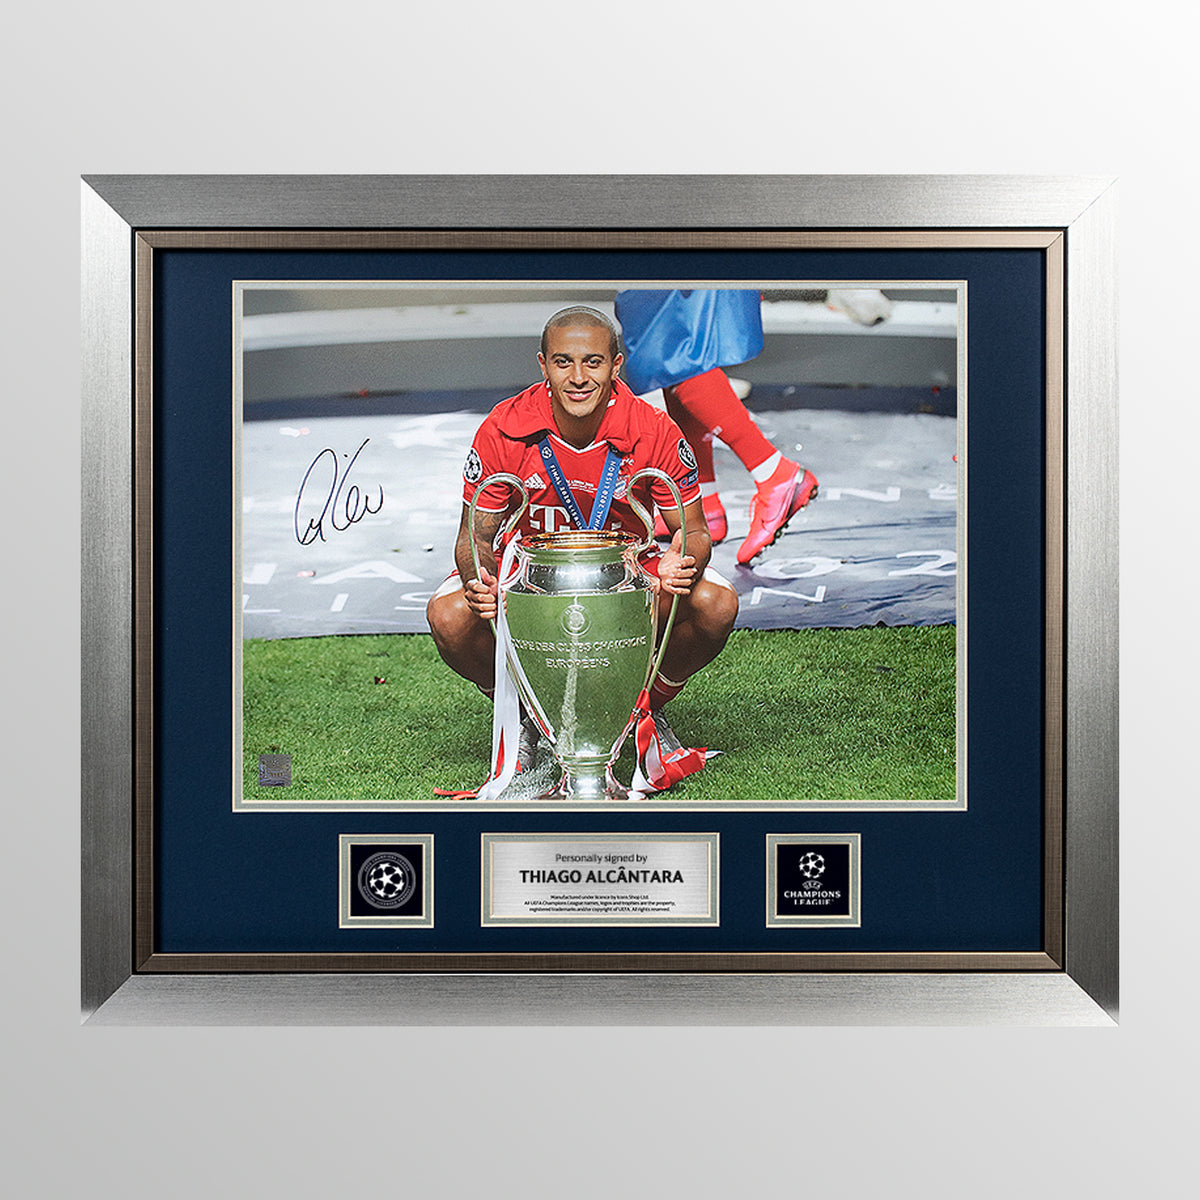 Thiago Alcantara Official UEFA Champions League Signed and Framed Bayern Munich Photo: 2020 Winner UEFA Club Competitions Online Store